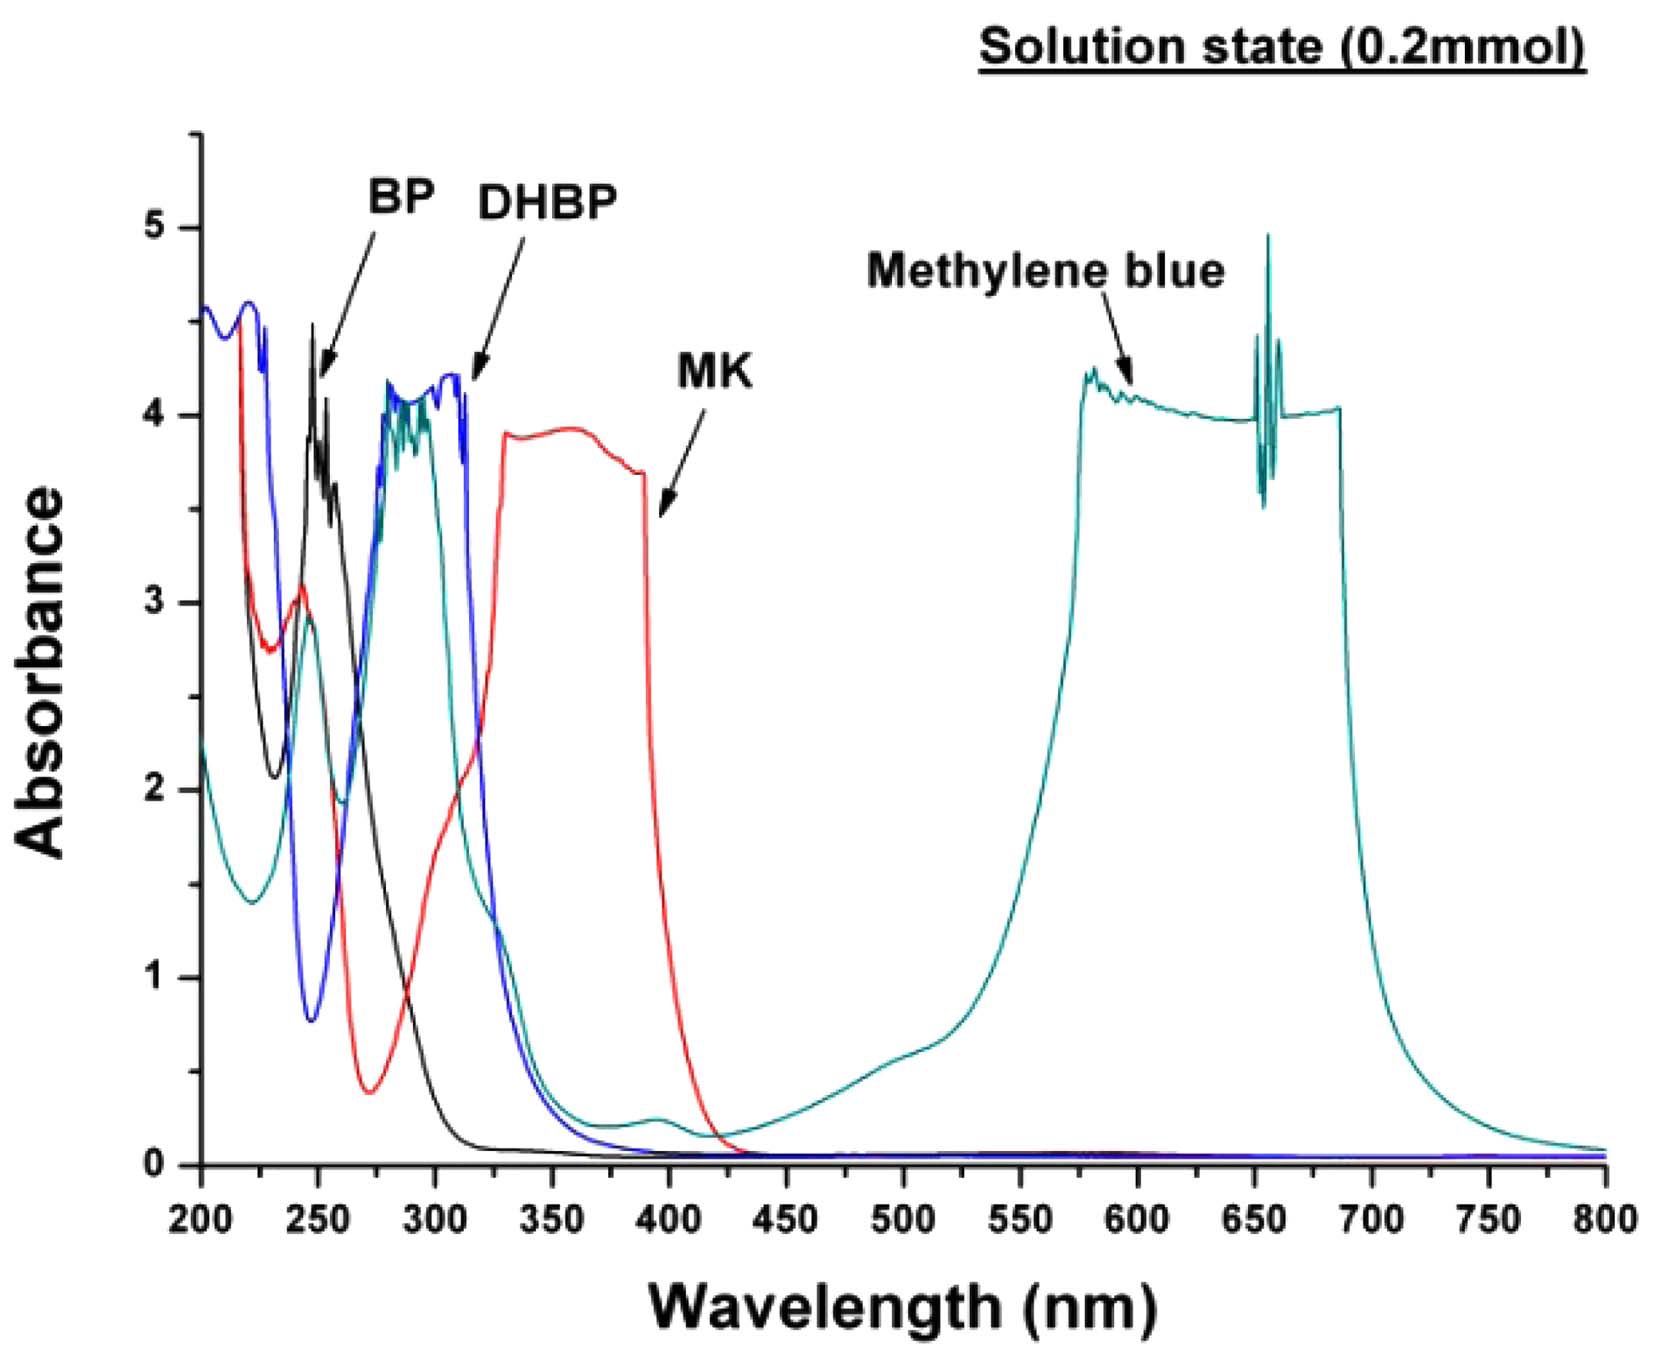 UV/V is spectra of photosensitizer; BP, MK, DHBP and MB in solvent (1-propanol at a concentration of 0.2 mmol).